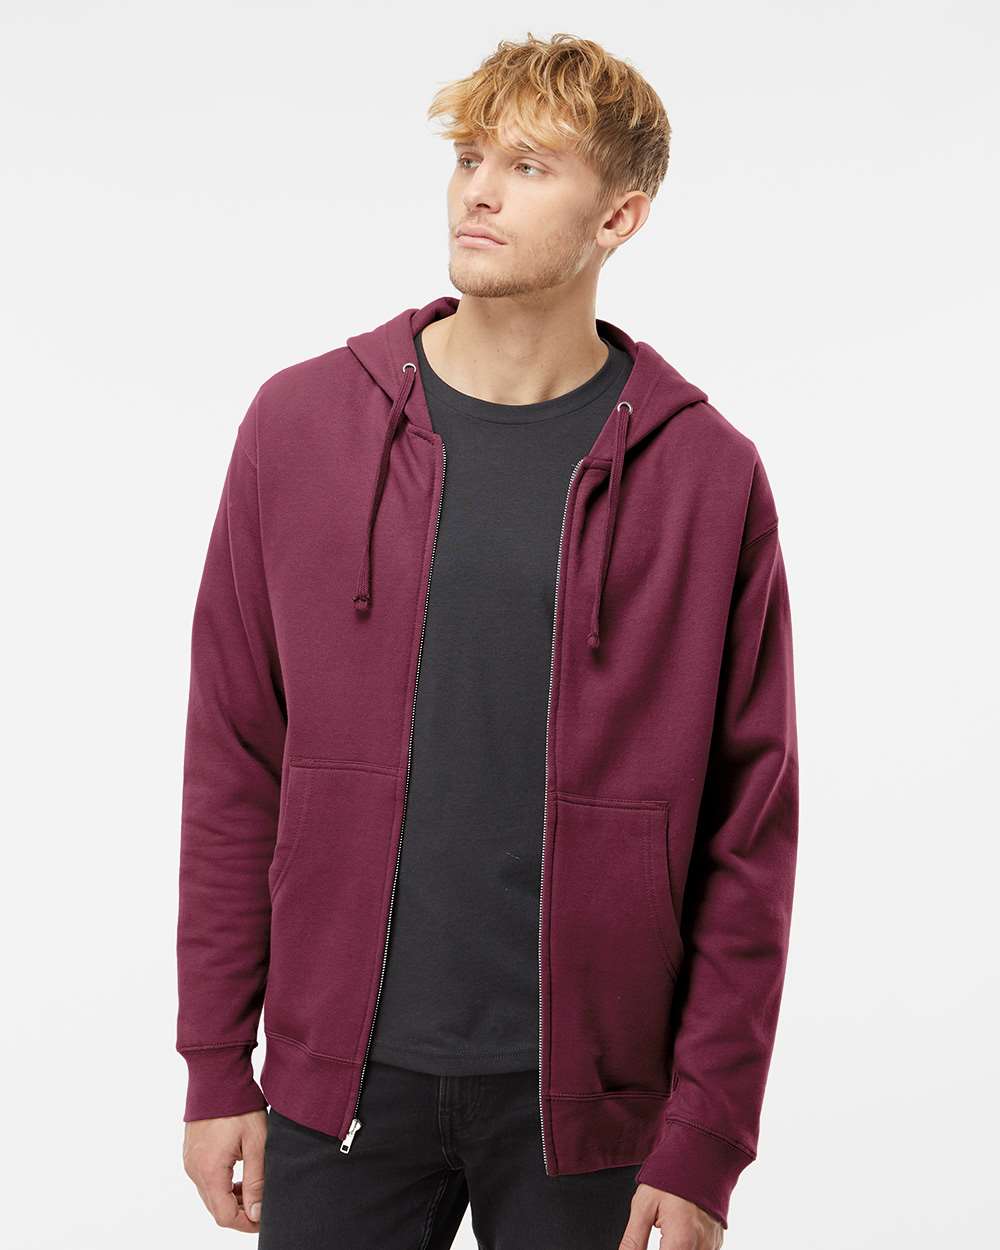 Independent Trading Co. Midweight Full-Zip Hooded Sweatshirt SS4500Z #colormdl_Maroon